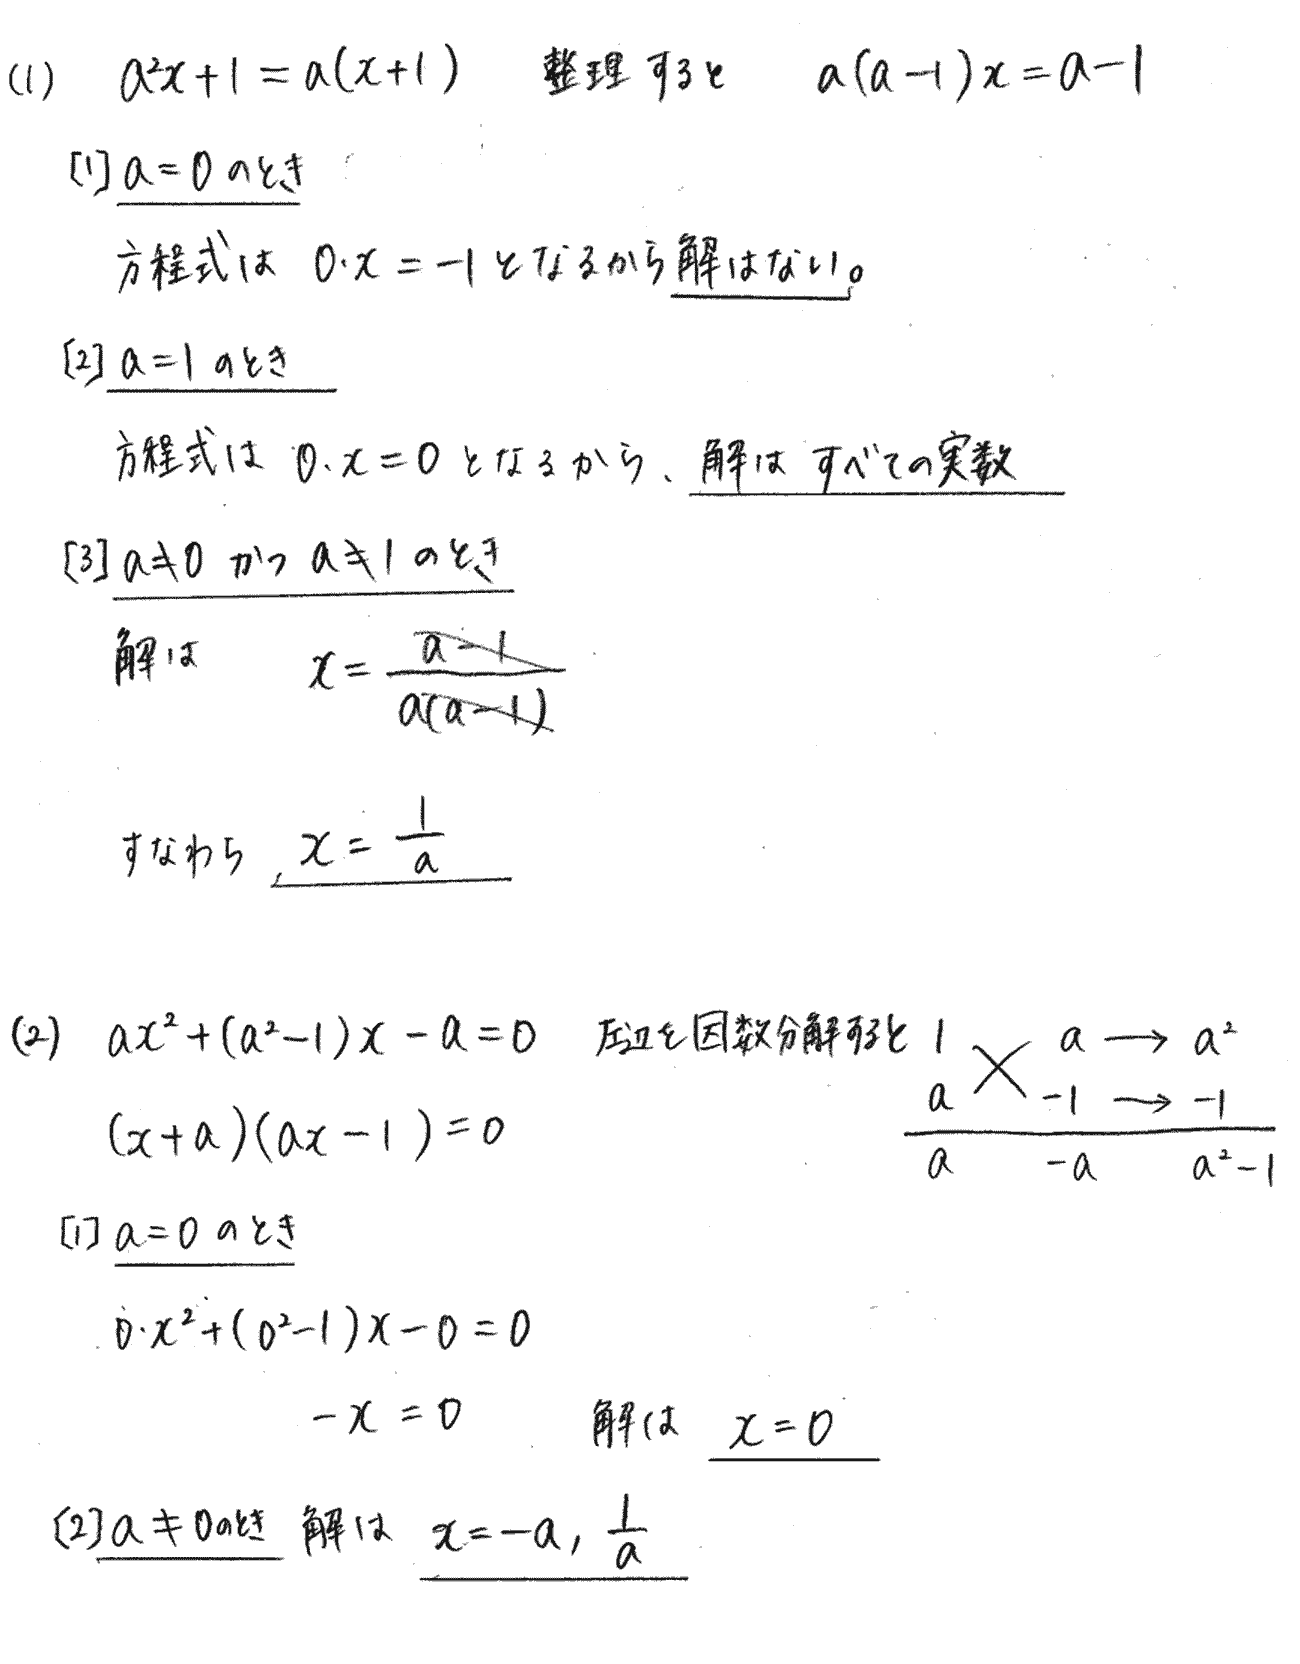 clear数学Ⅰ-286解答 